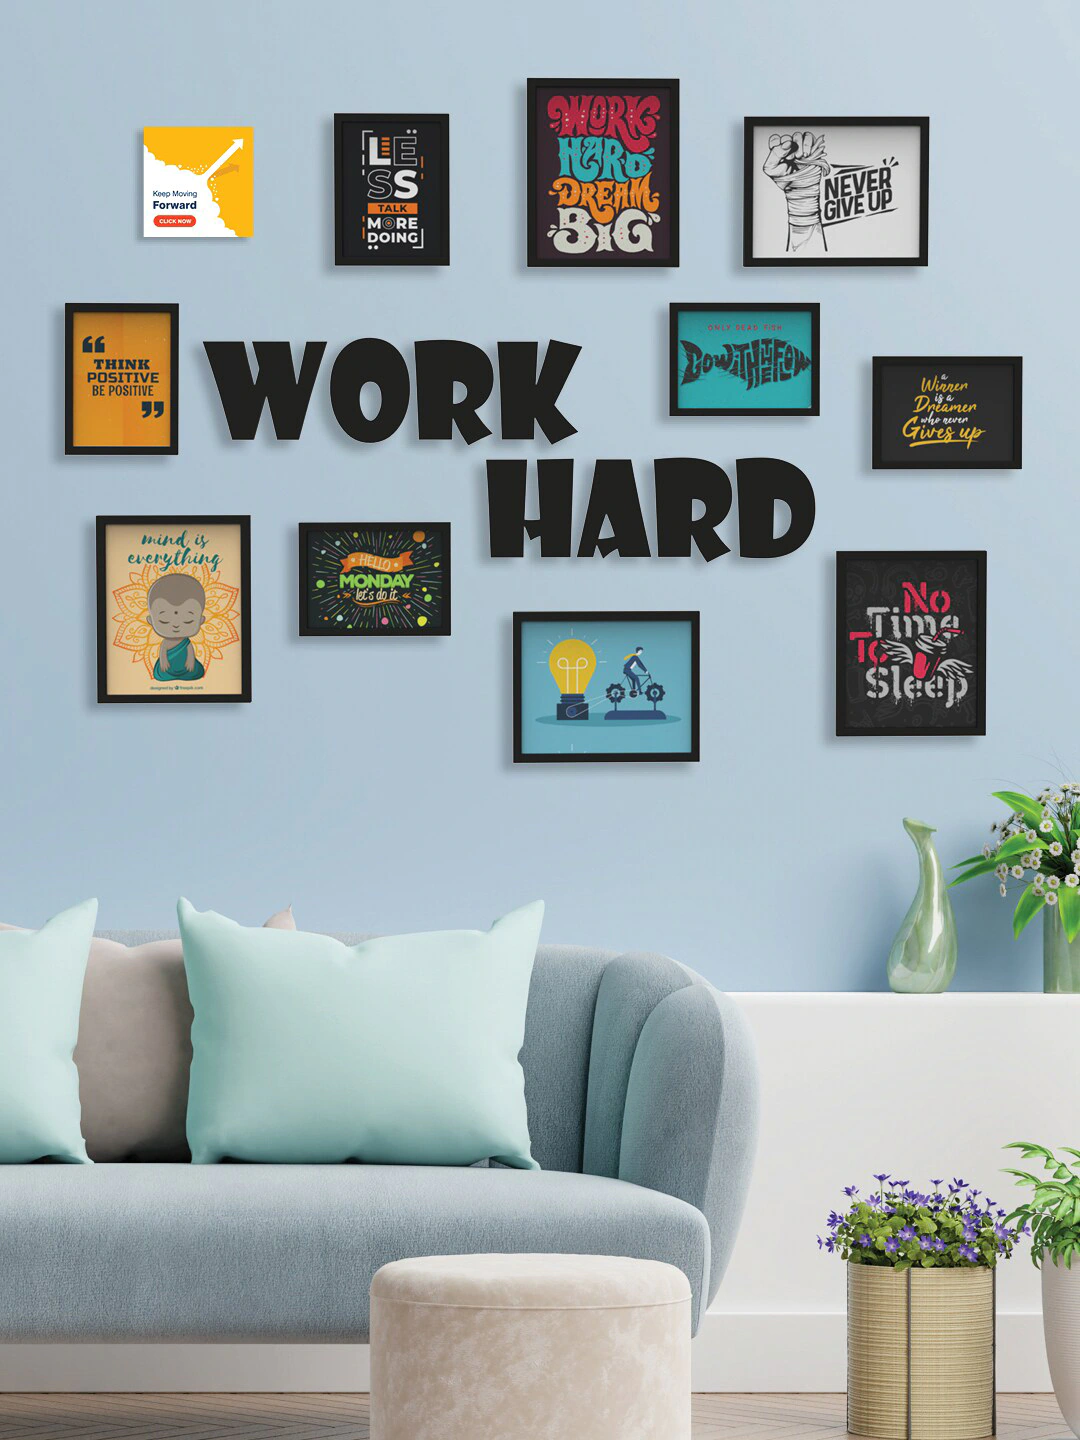 Black Set of 10 3D Collage Photo Frames With WORK HARD Plaque